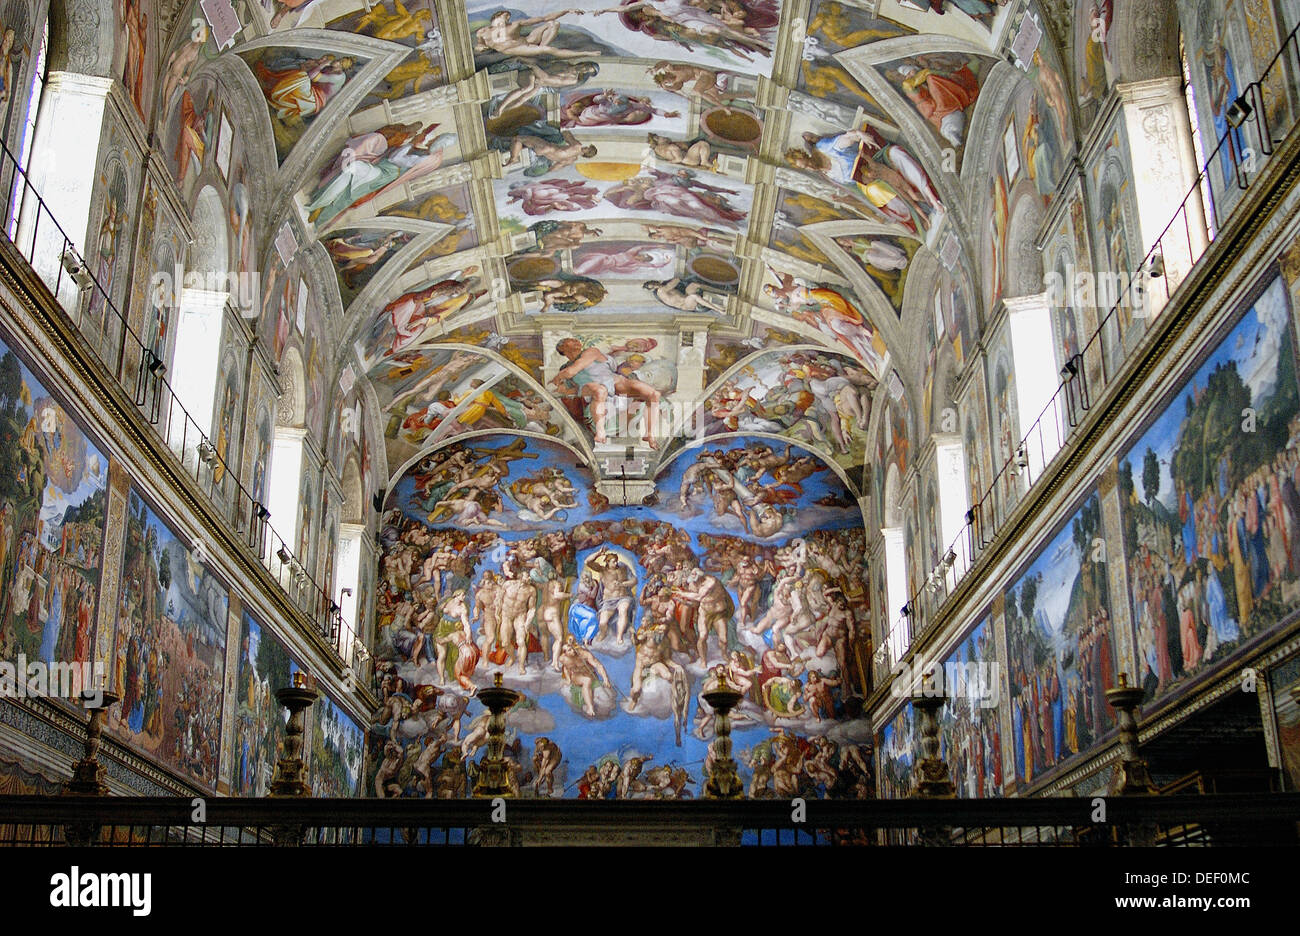 Renaissance frescoes by Michelangelo in the Sistine Chapel, Vatican Palace museums. Vatican City, Rome. Italy Stock Photo